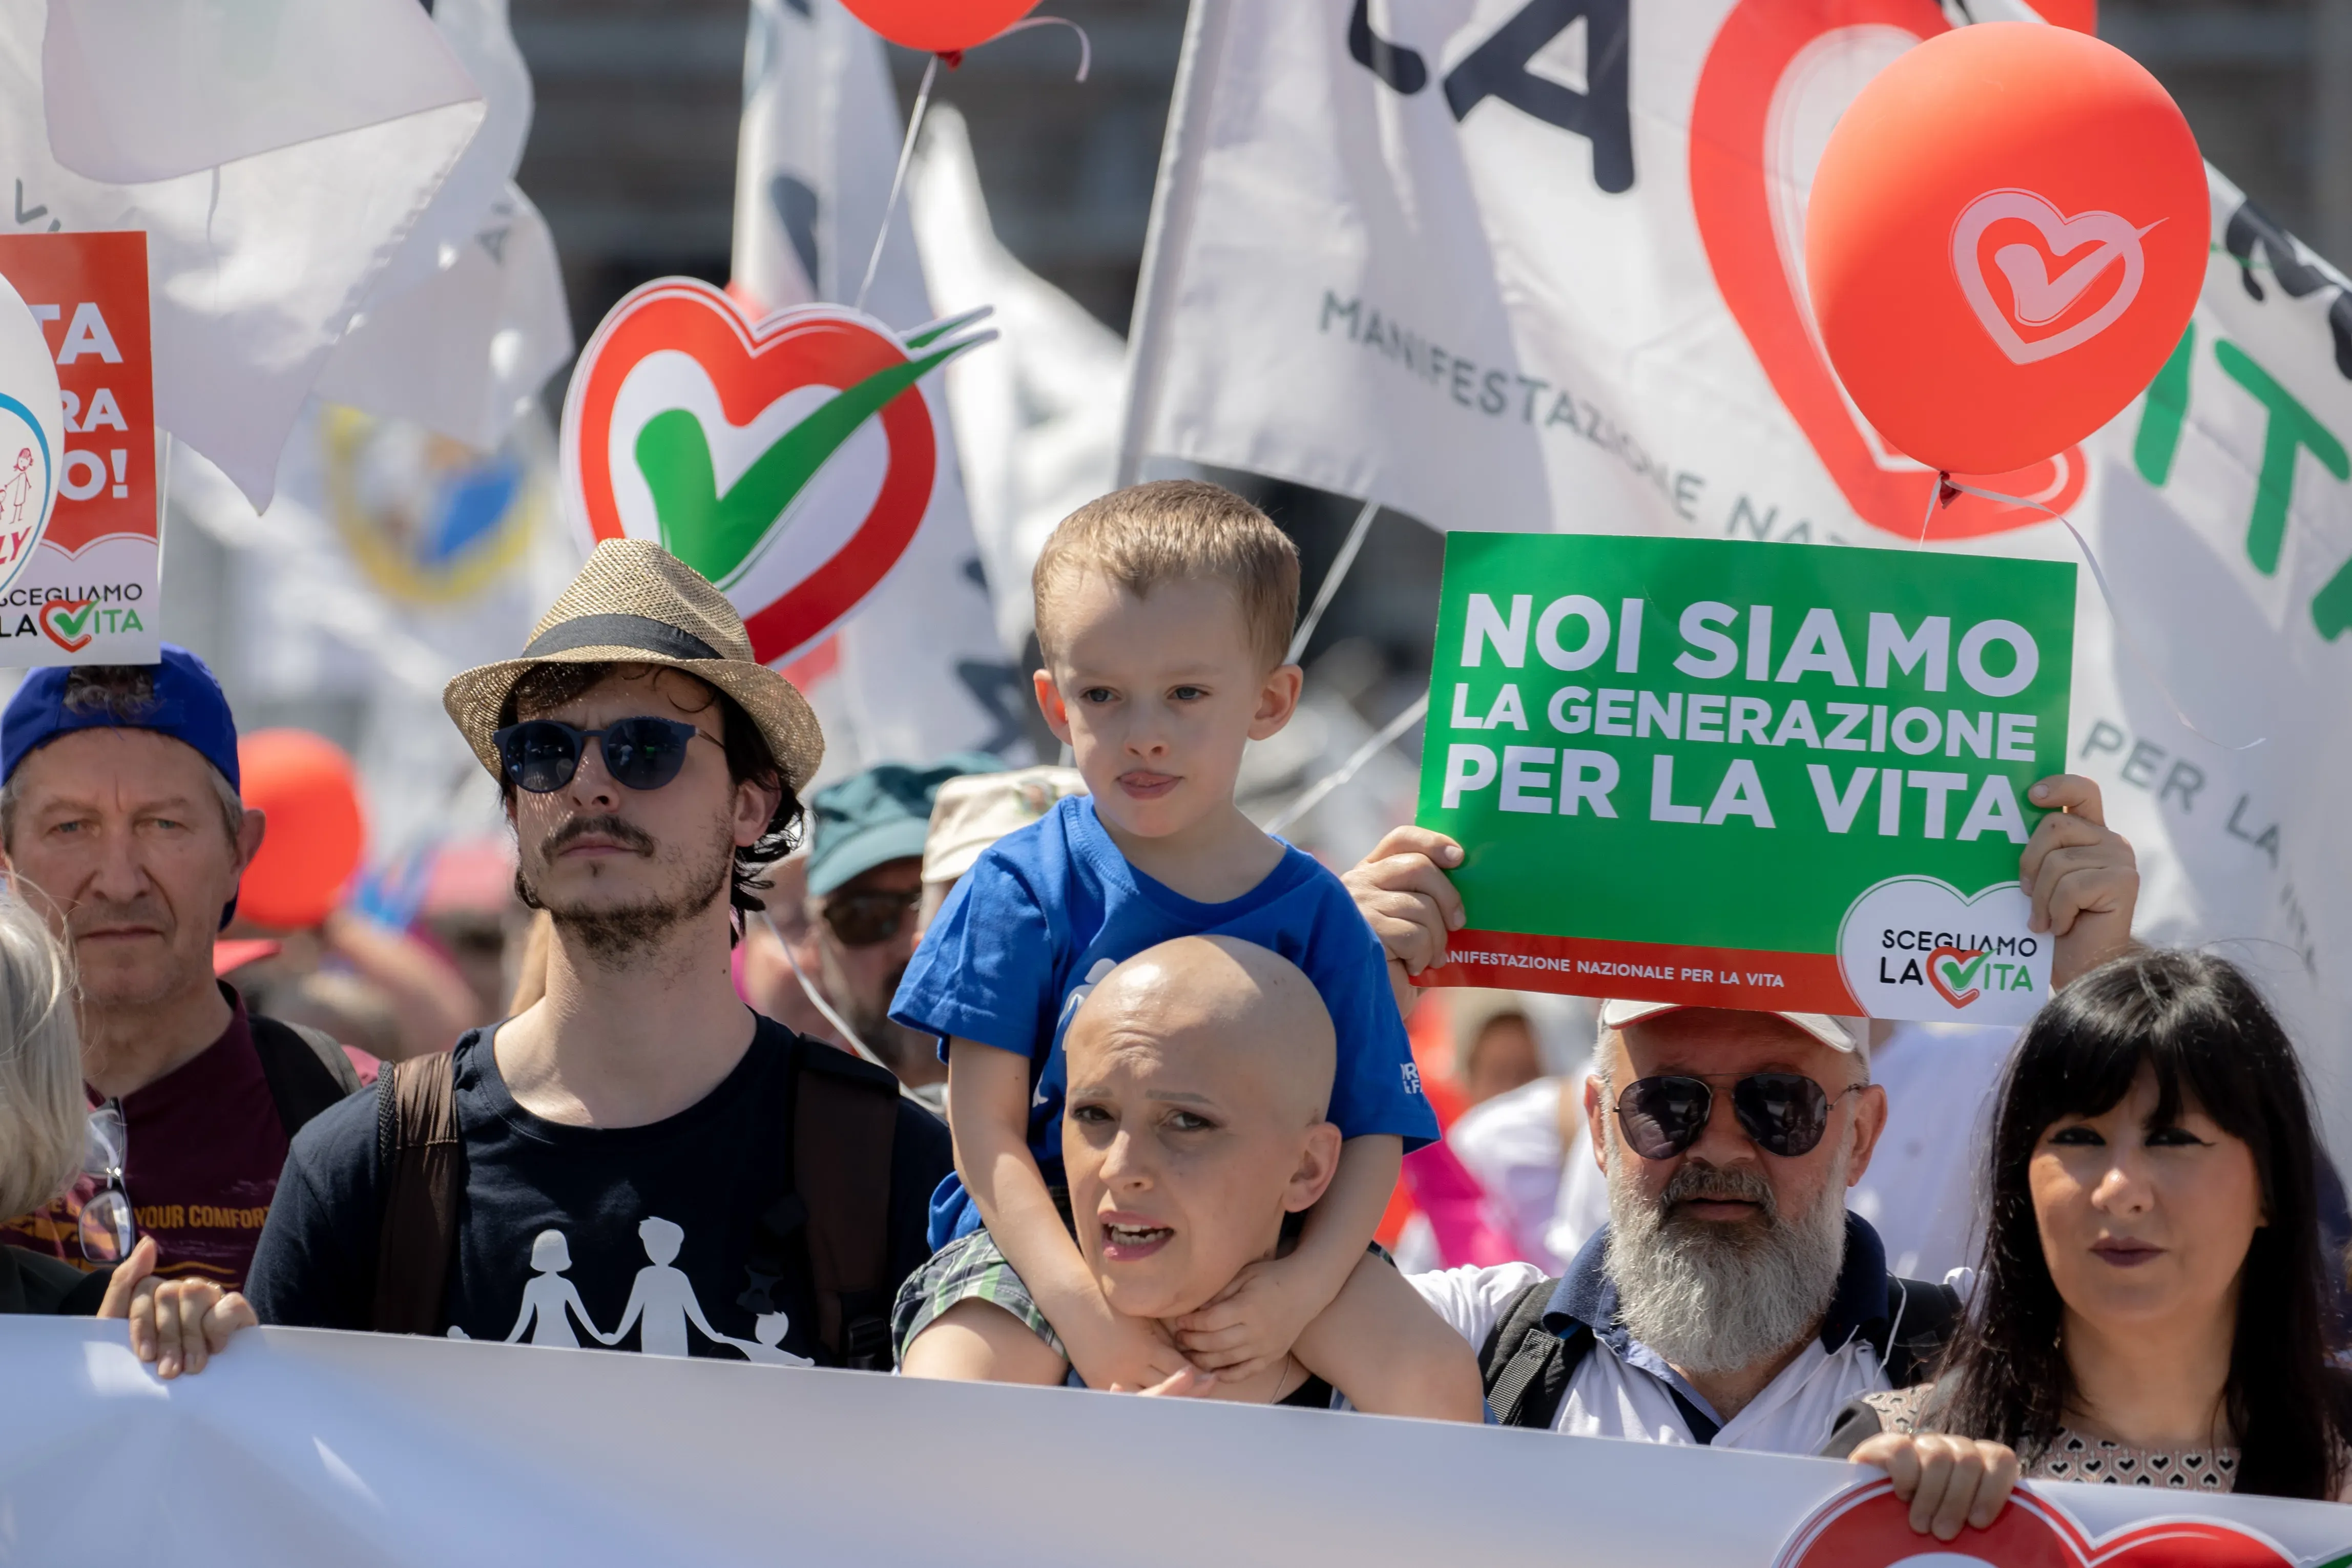 Participants in Italy's pro-life demonstration in Rome on May 21, 2022. Daniel Ibáñez/CNA